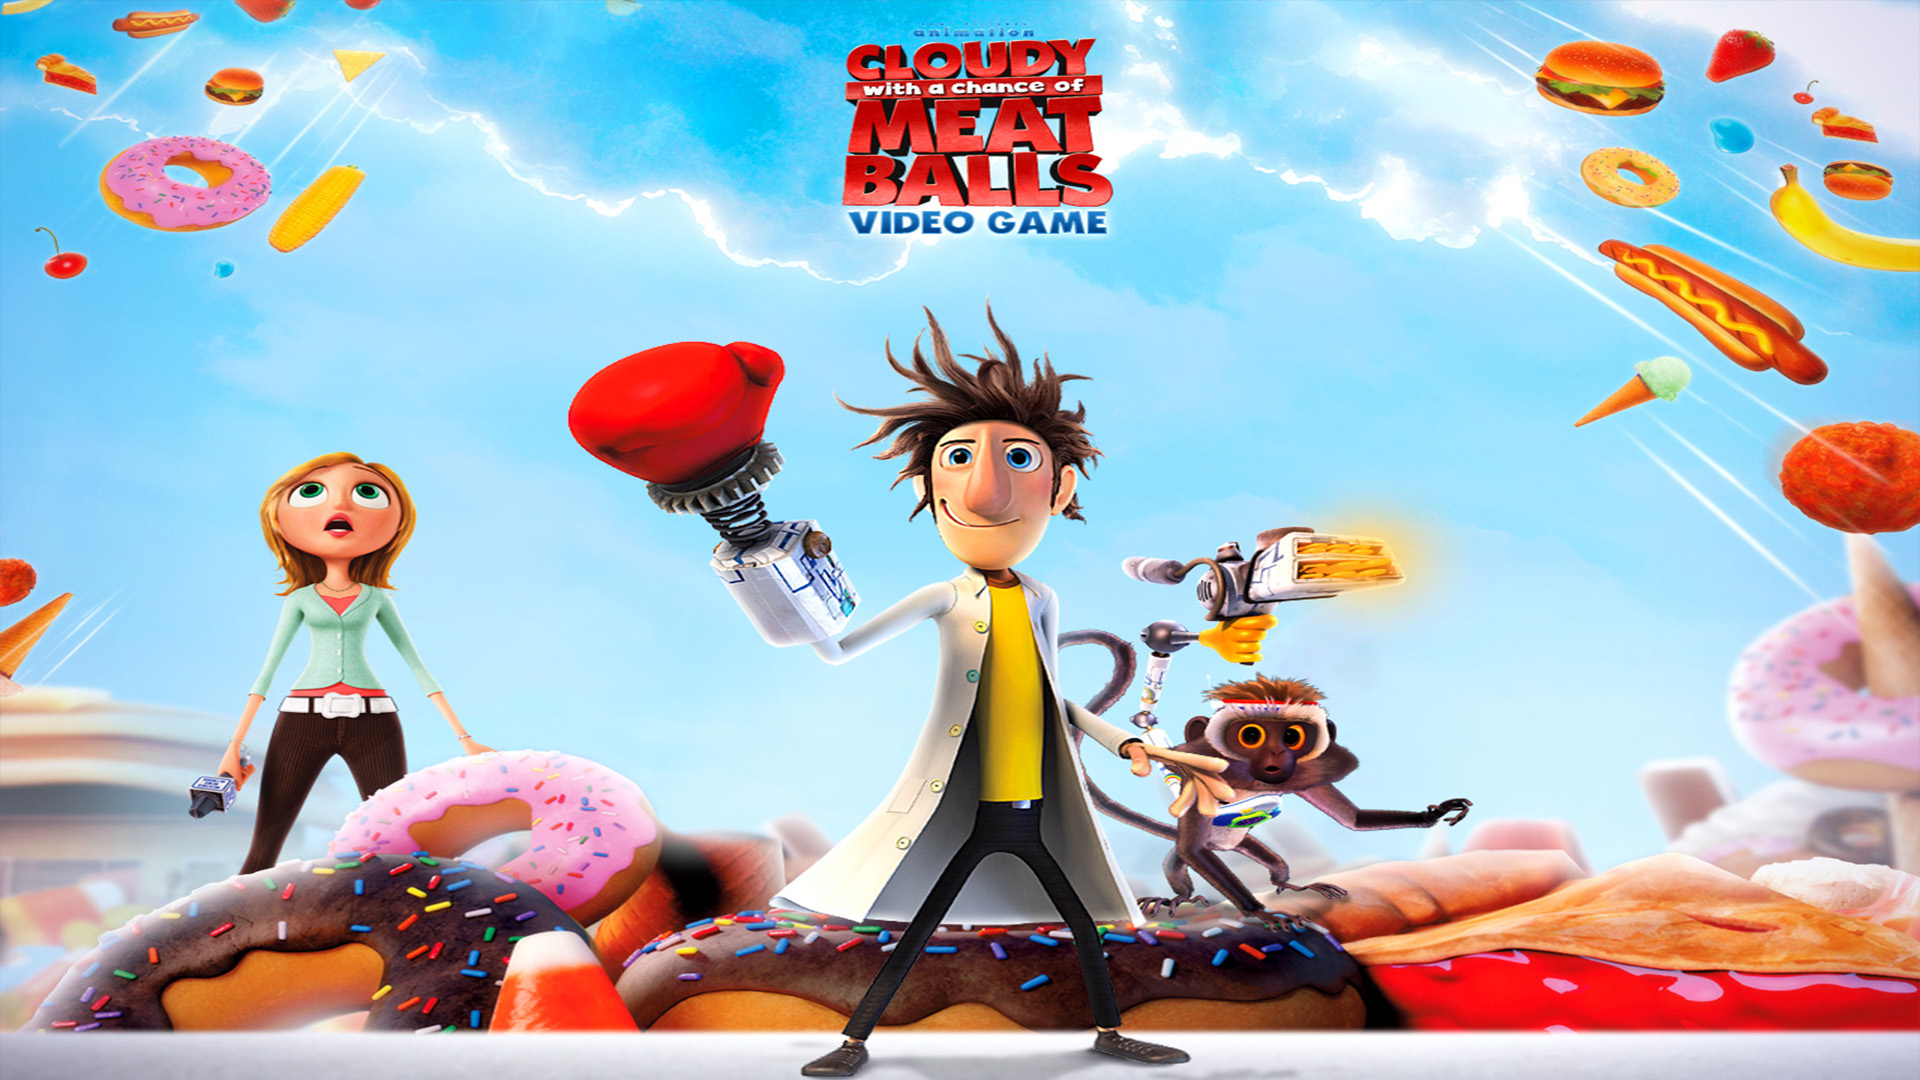 Video Game Cloudy With A Chance Of Meatballs 1920x1080